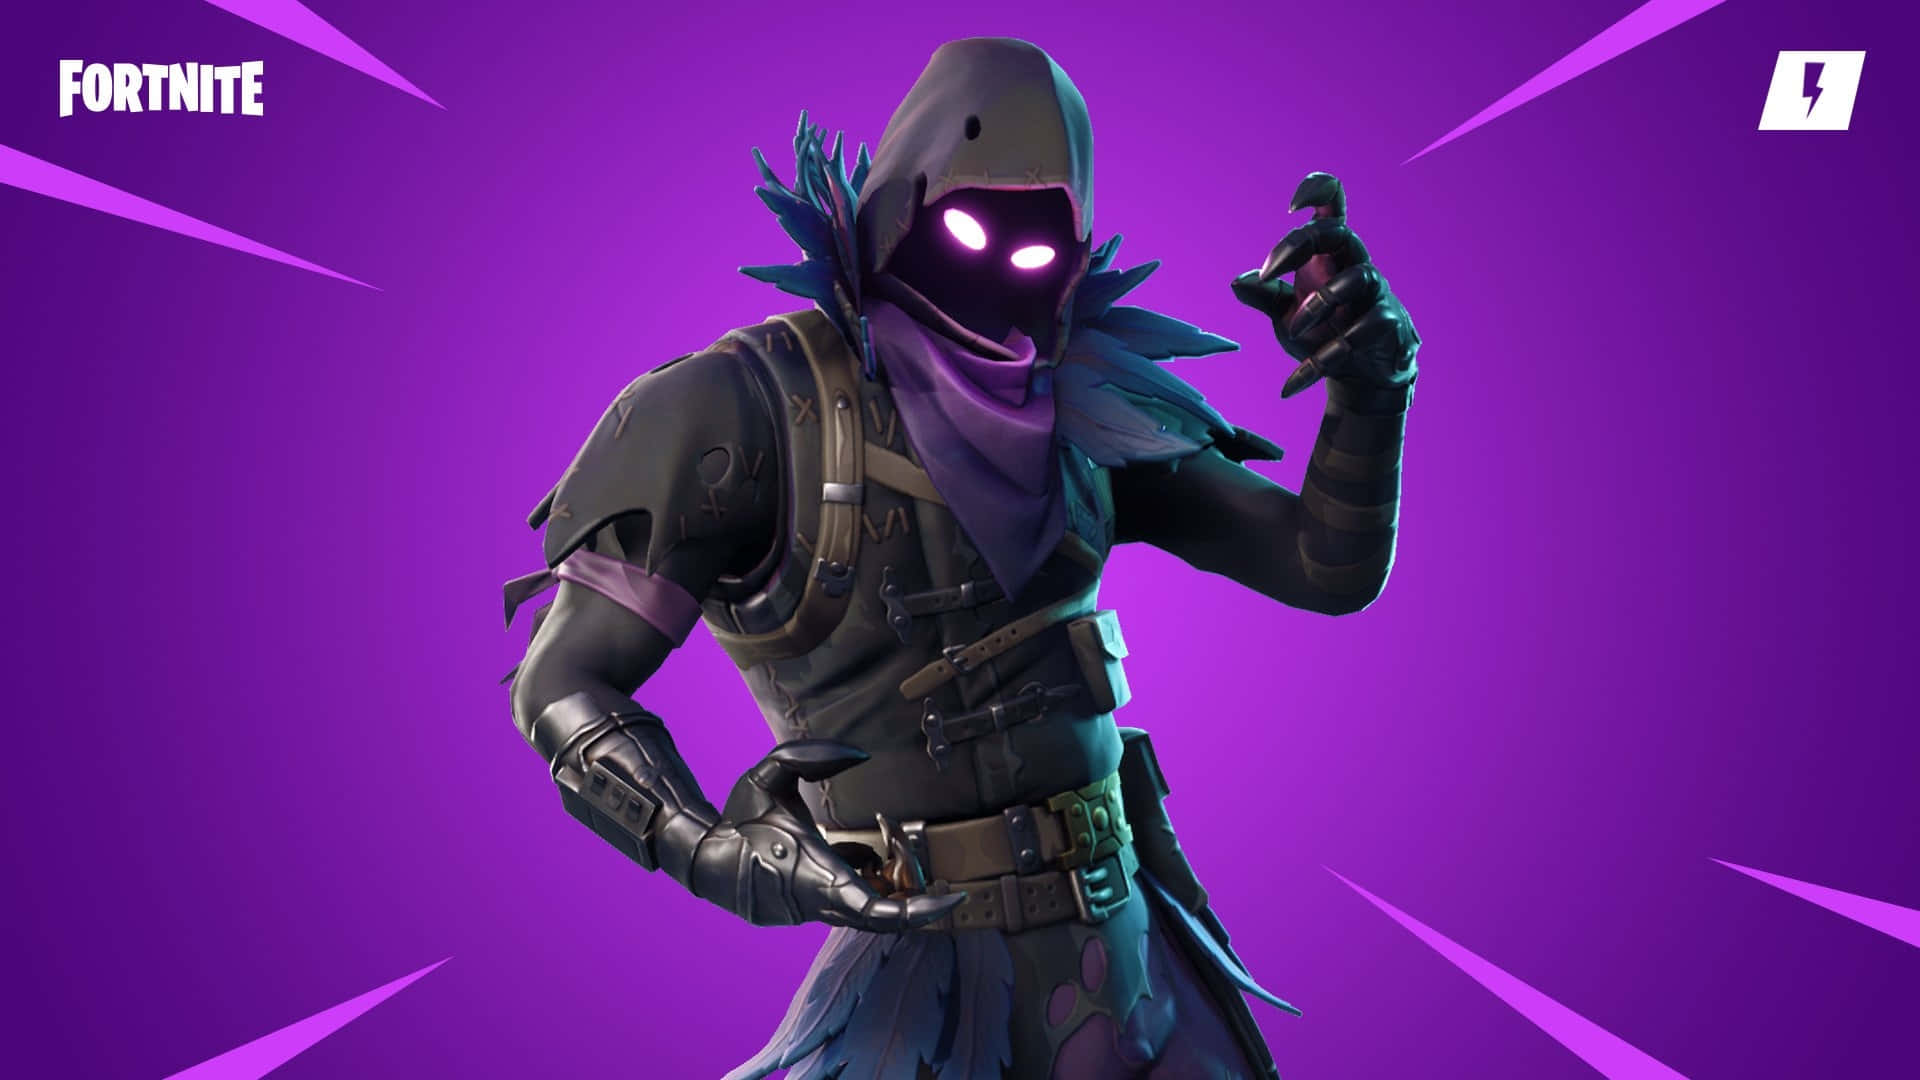 Play the popular game "Fortnite" with the Purple variant! Wallpaper